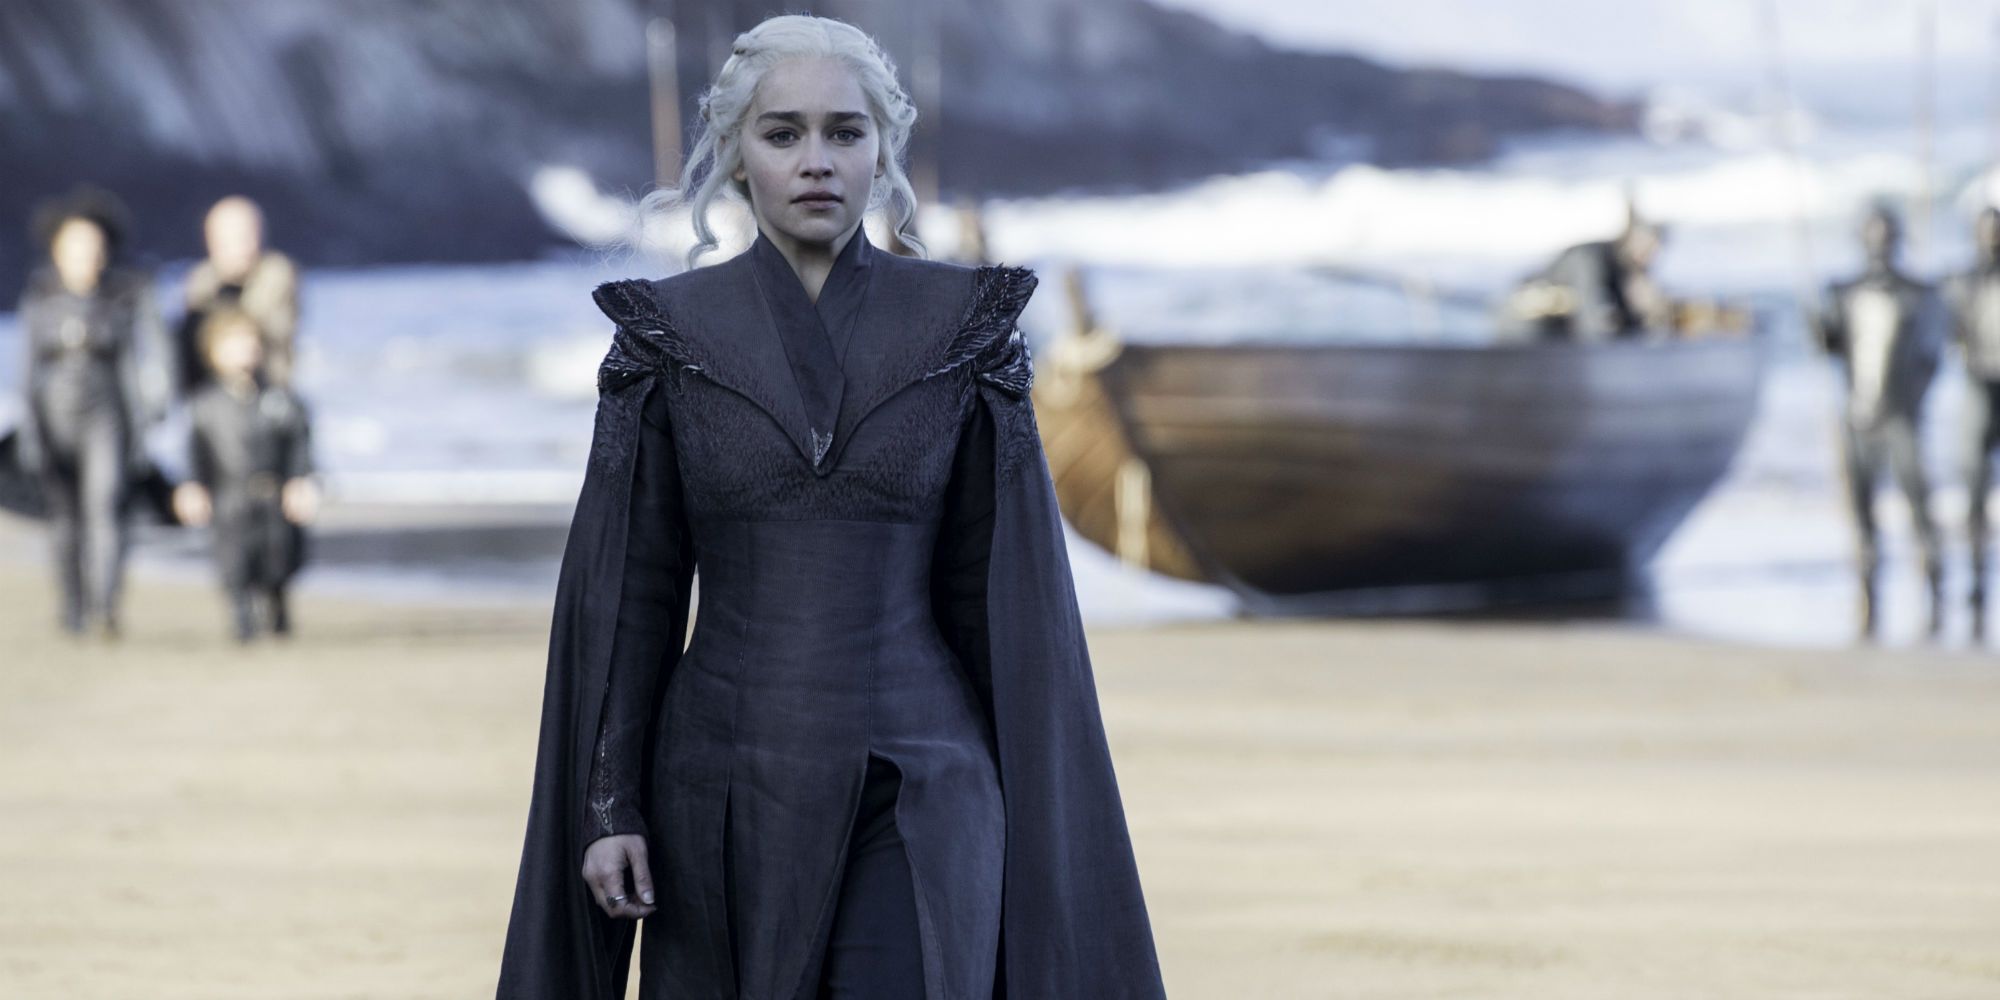 Daenerys Targaryen walks off on shore as Tyrion, Missandei, and others are in the background with a boat